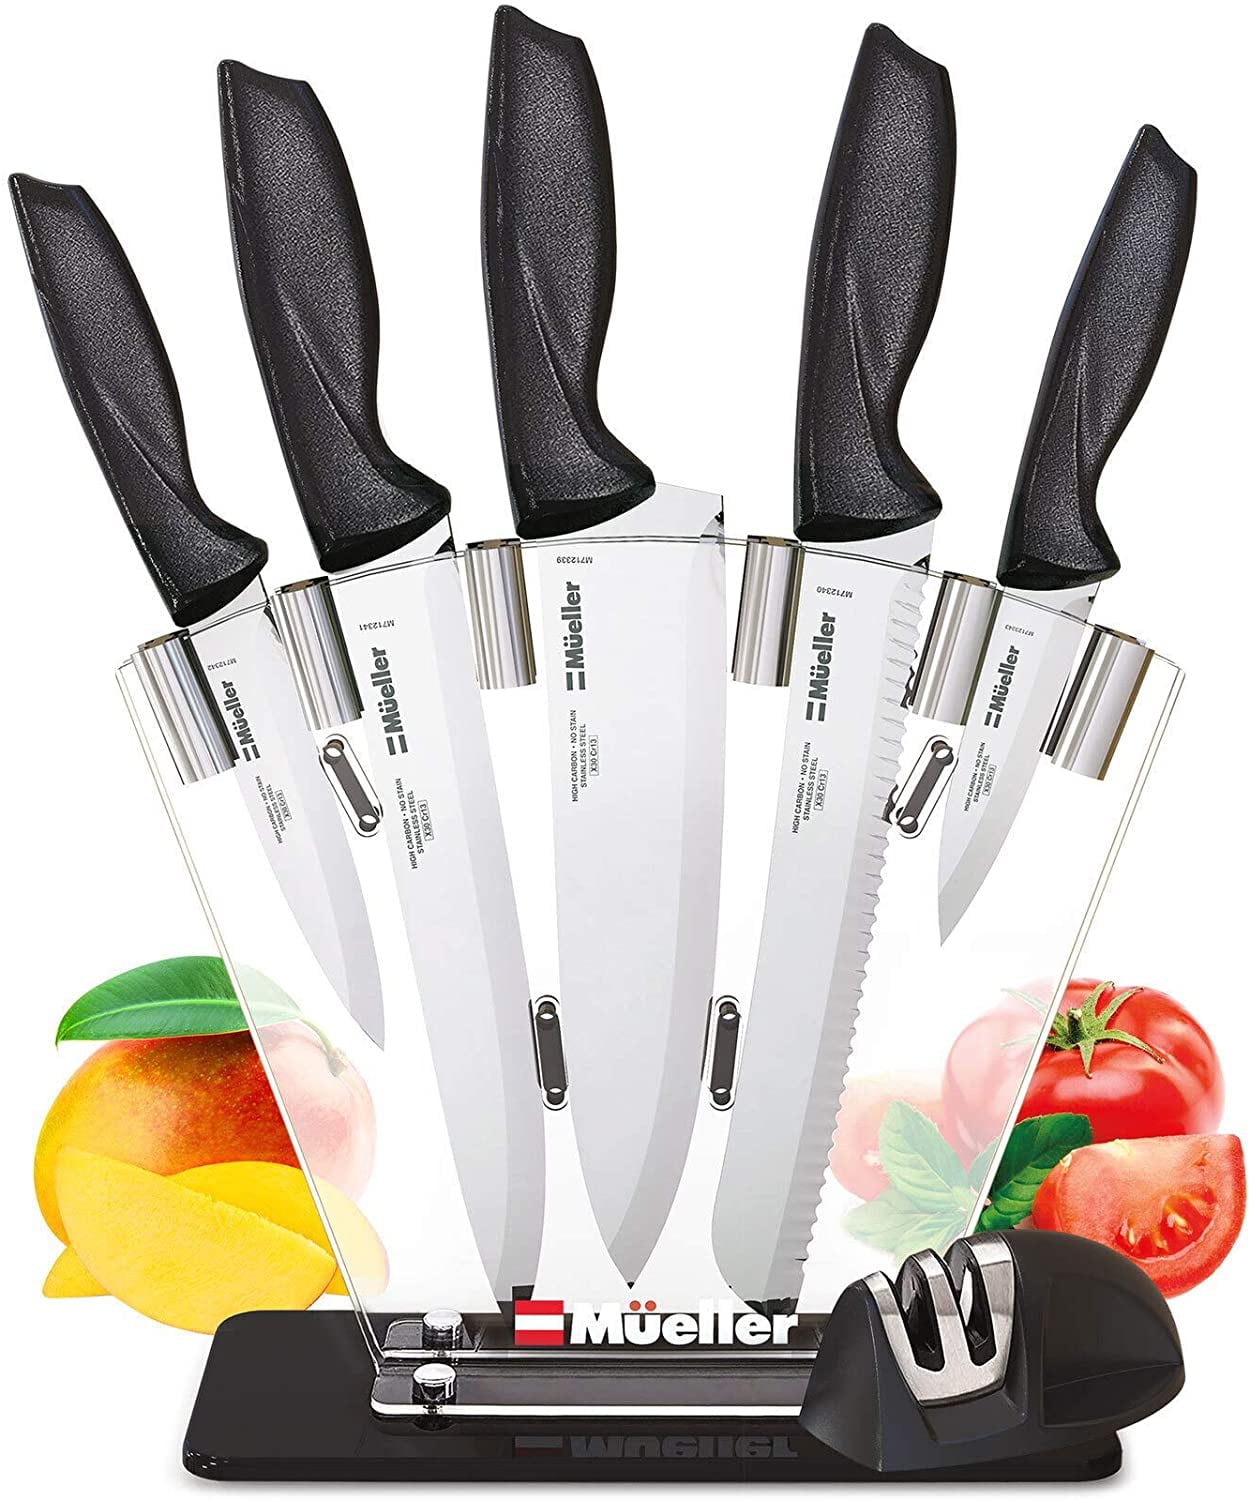  Müller Koch MK-2811-8 PCS Knife Set with Acrylic Block Stand  (SILVER): Home & Kitchen